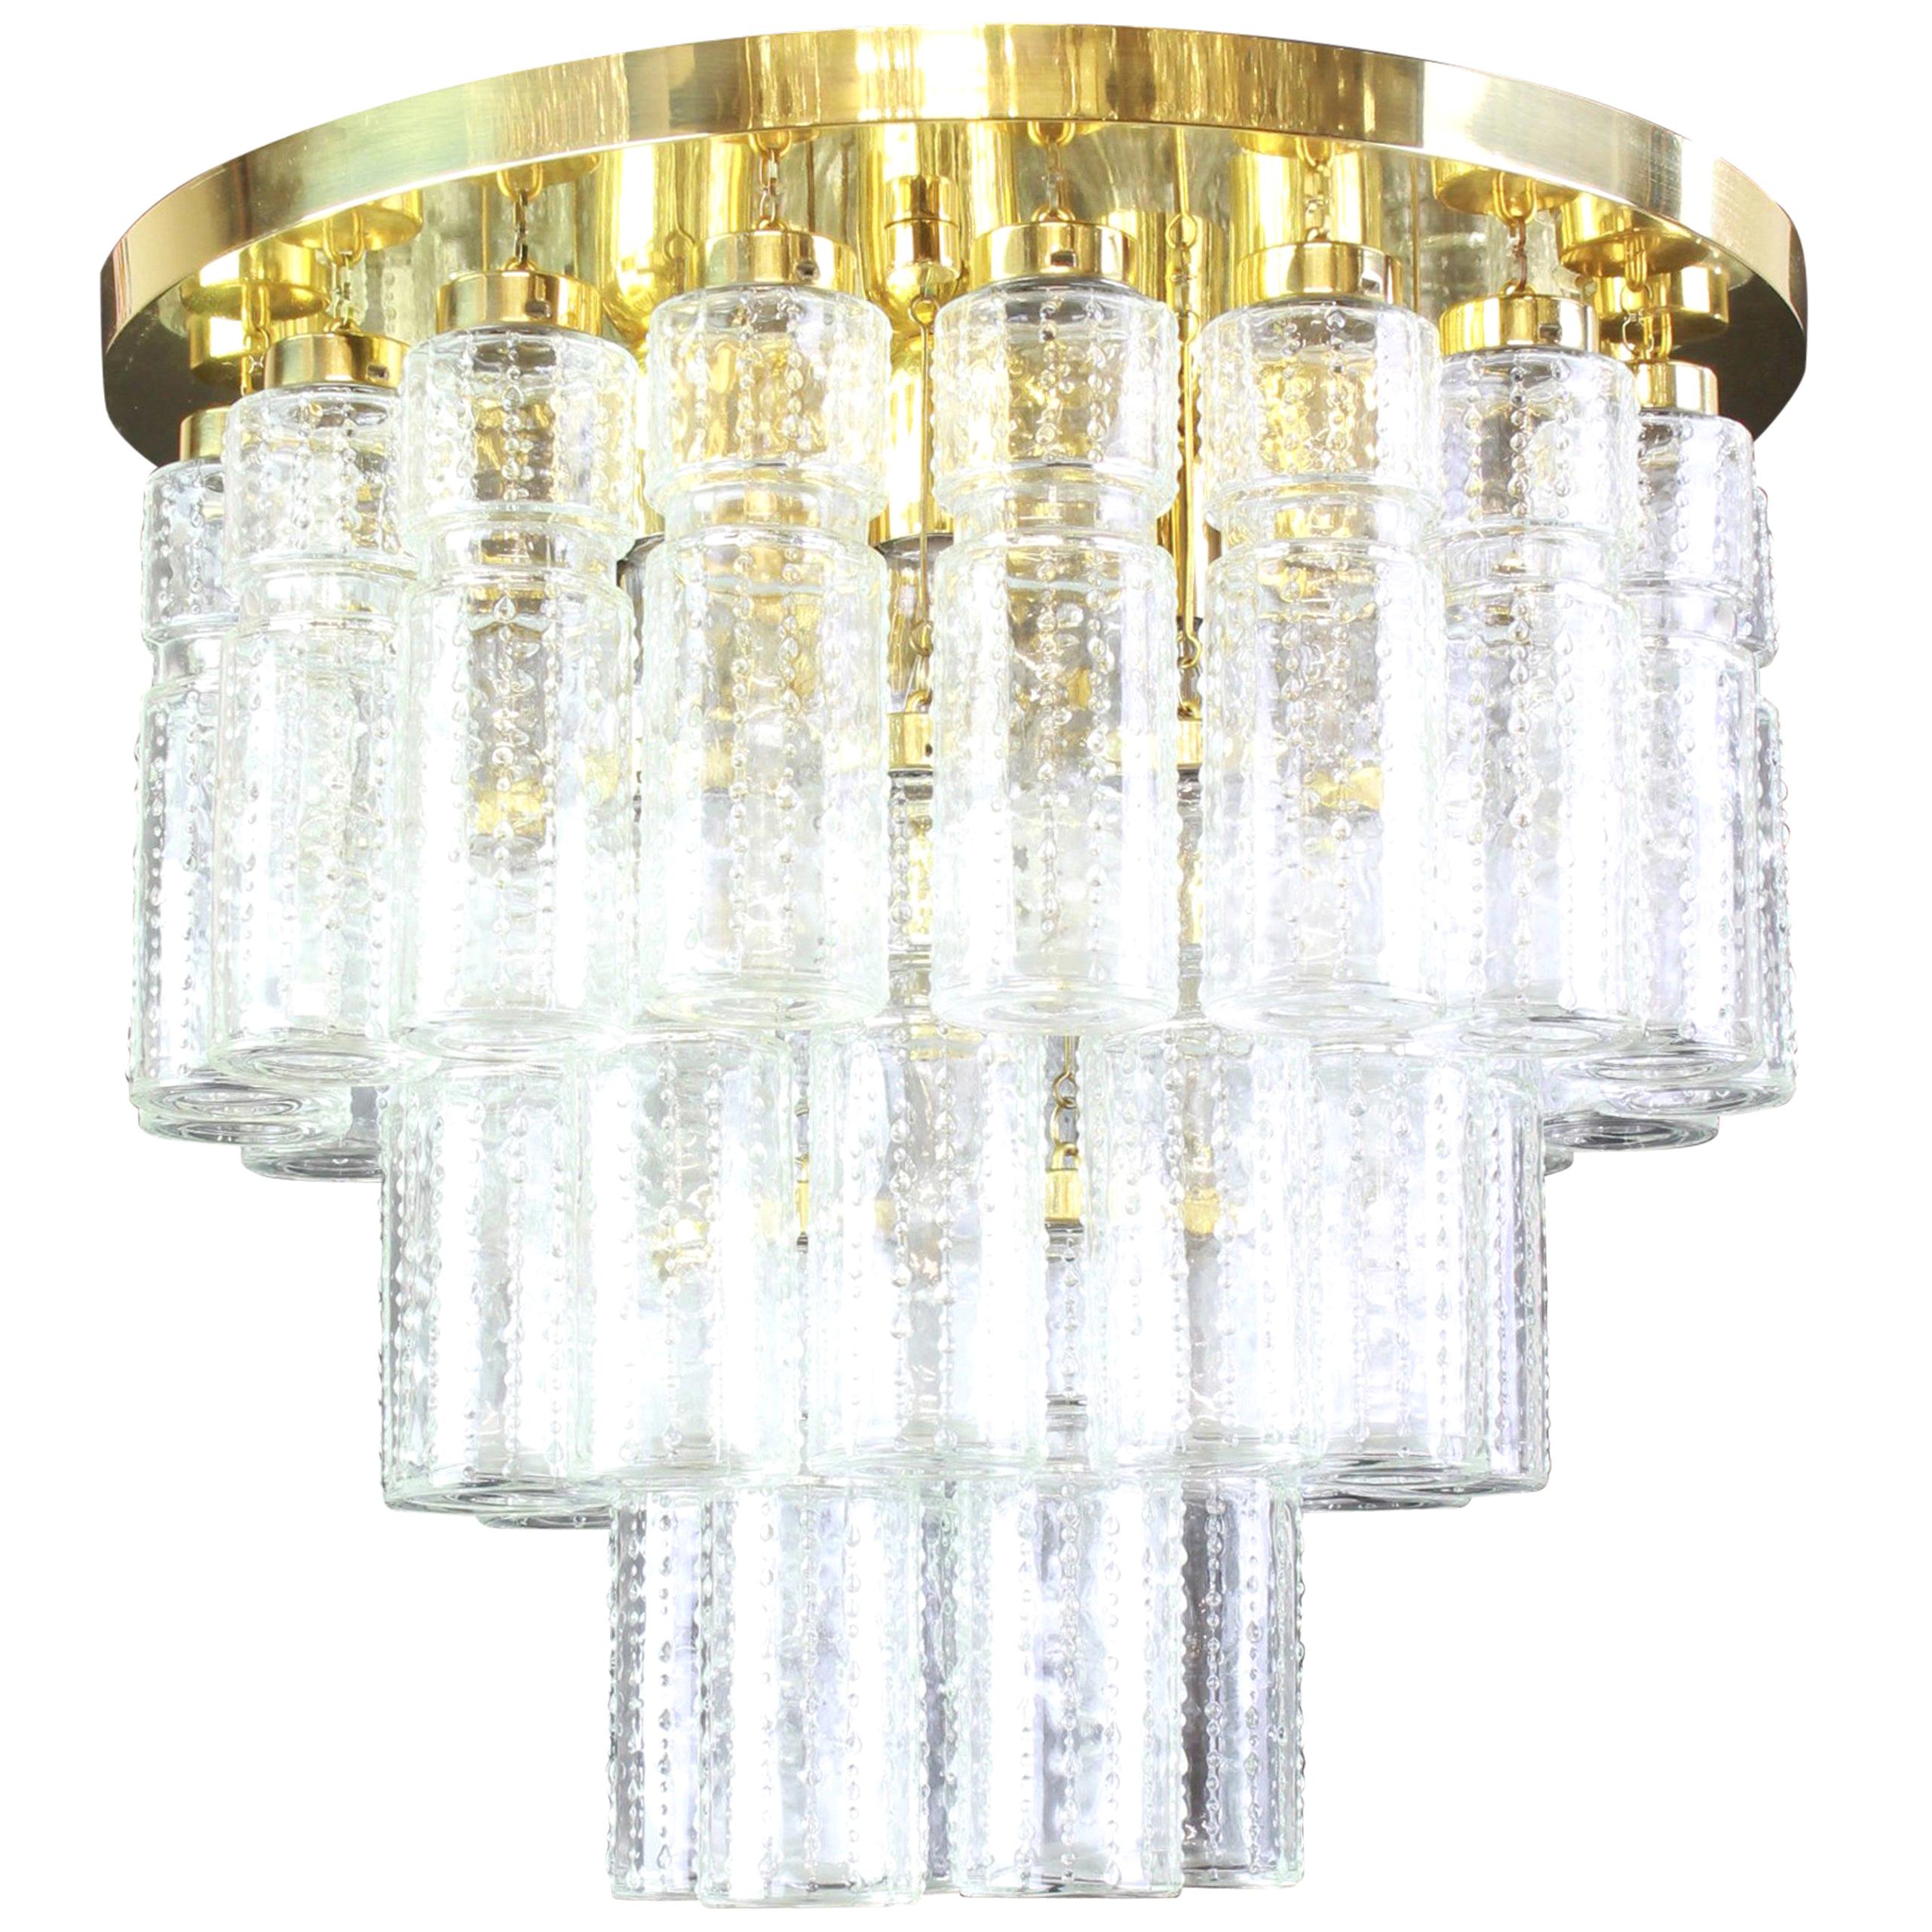 1 of 2 Large Limburg Glass Chandelier, Germany, 1960s For Sale at 1stDibs